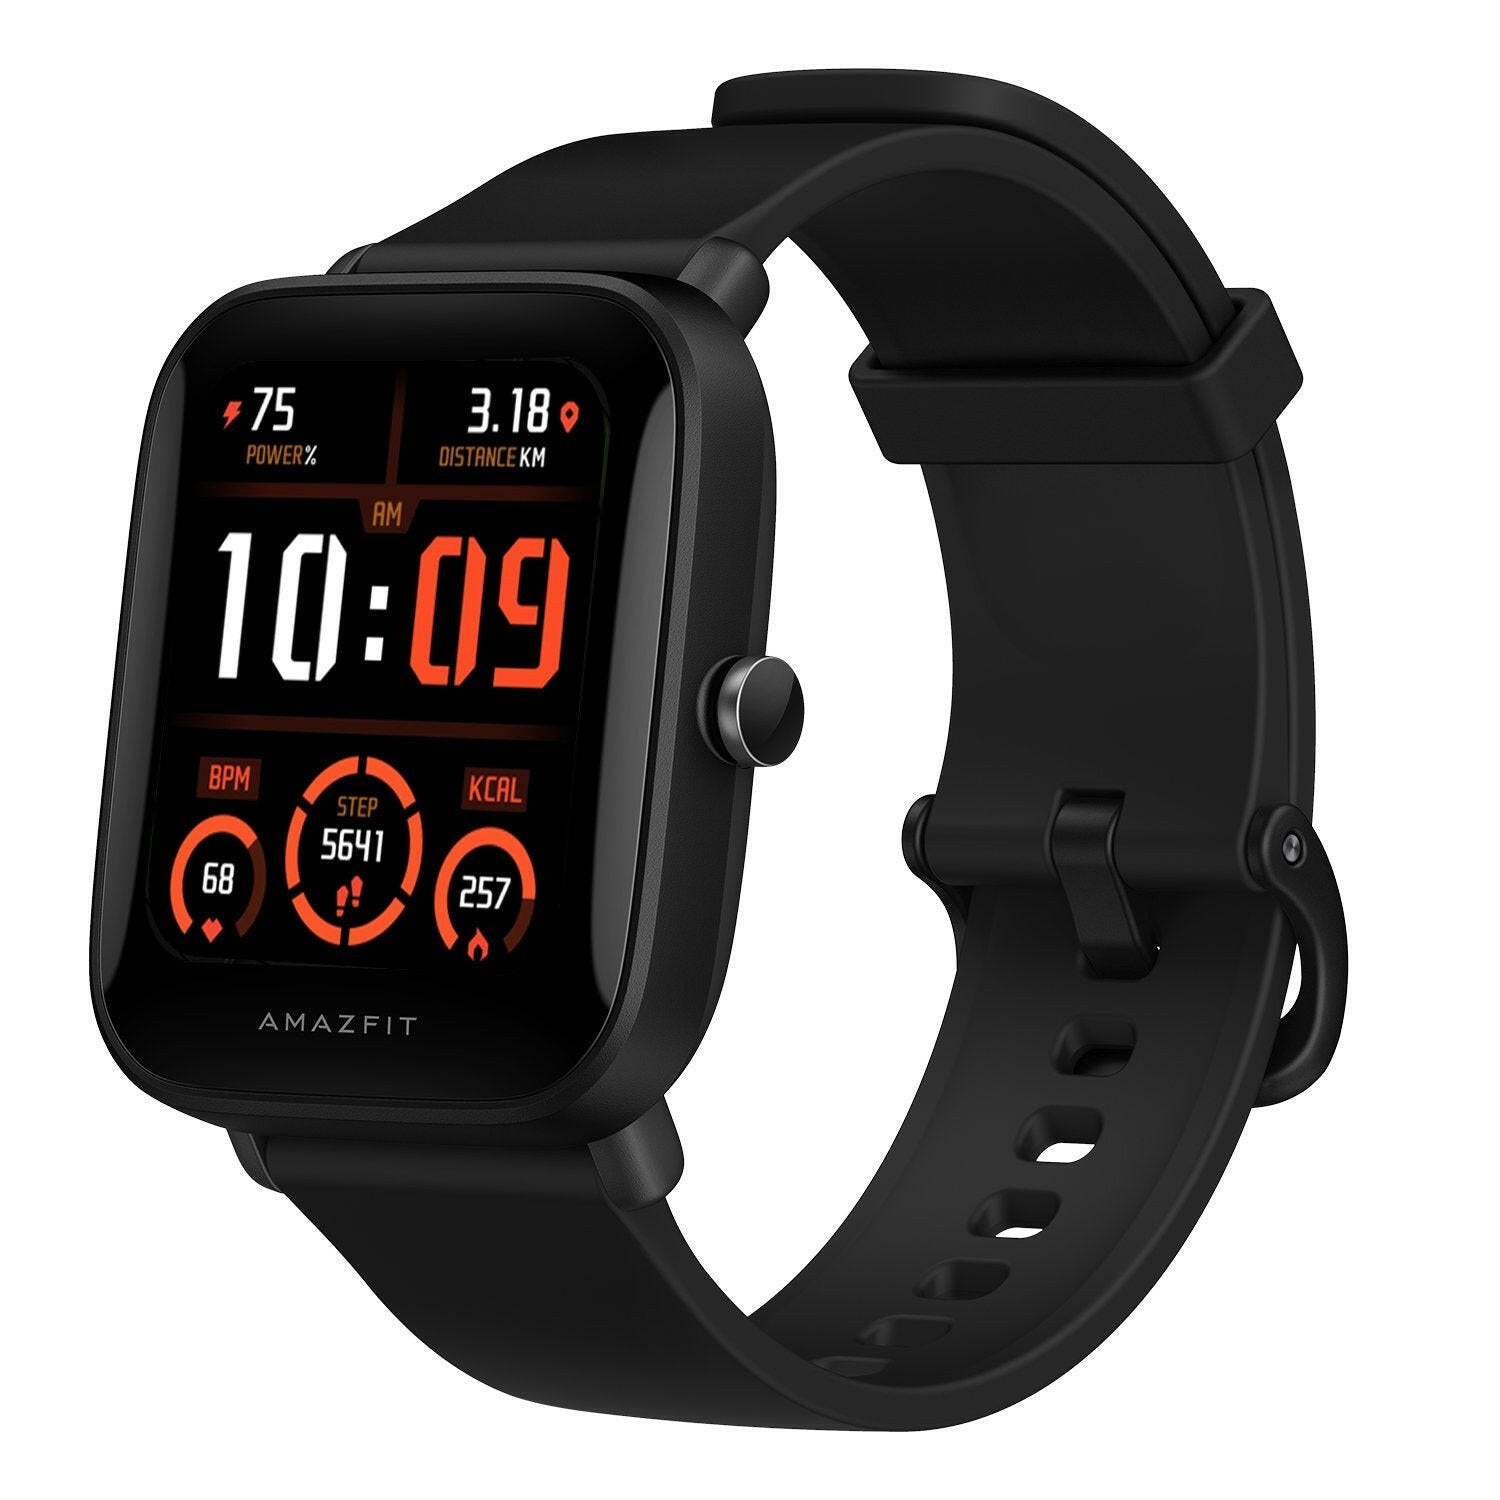 Amazfit US Smartwatches & Fitness Wearables